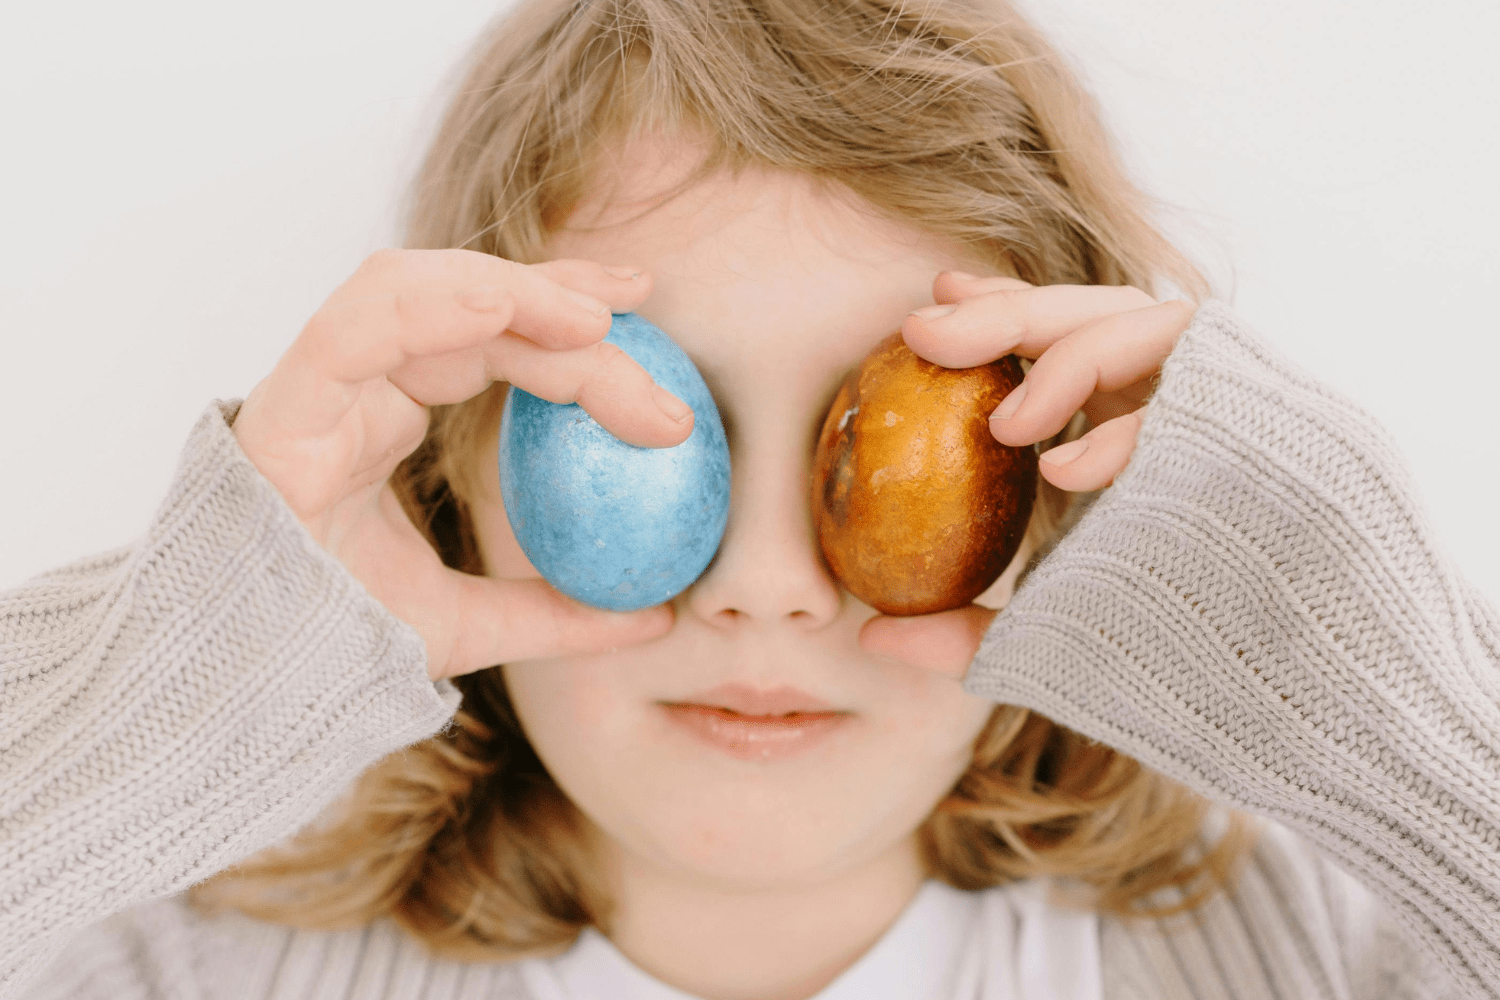 A child holds two Easter eggs in front of his eyes